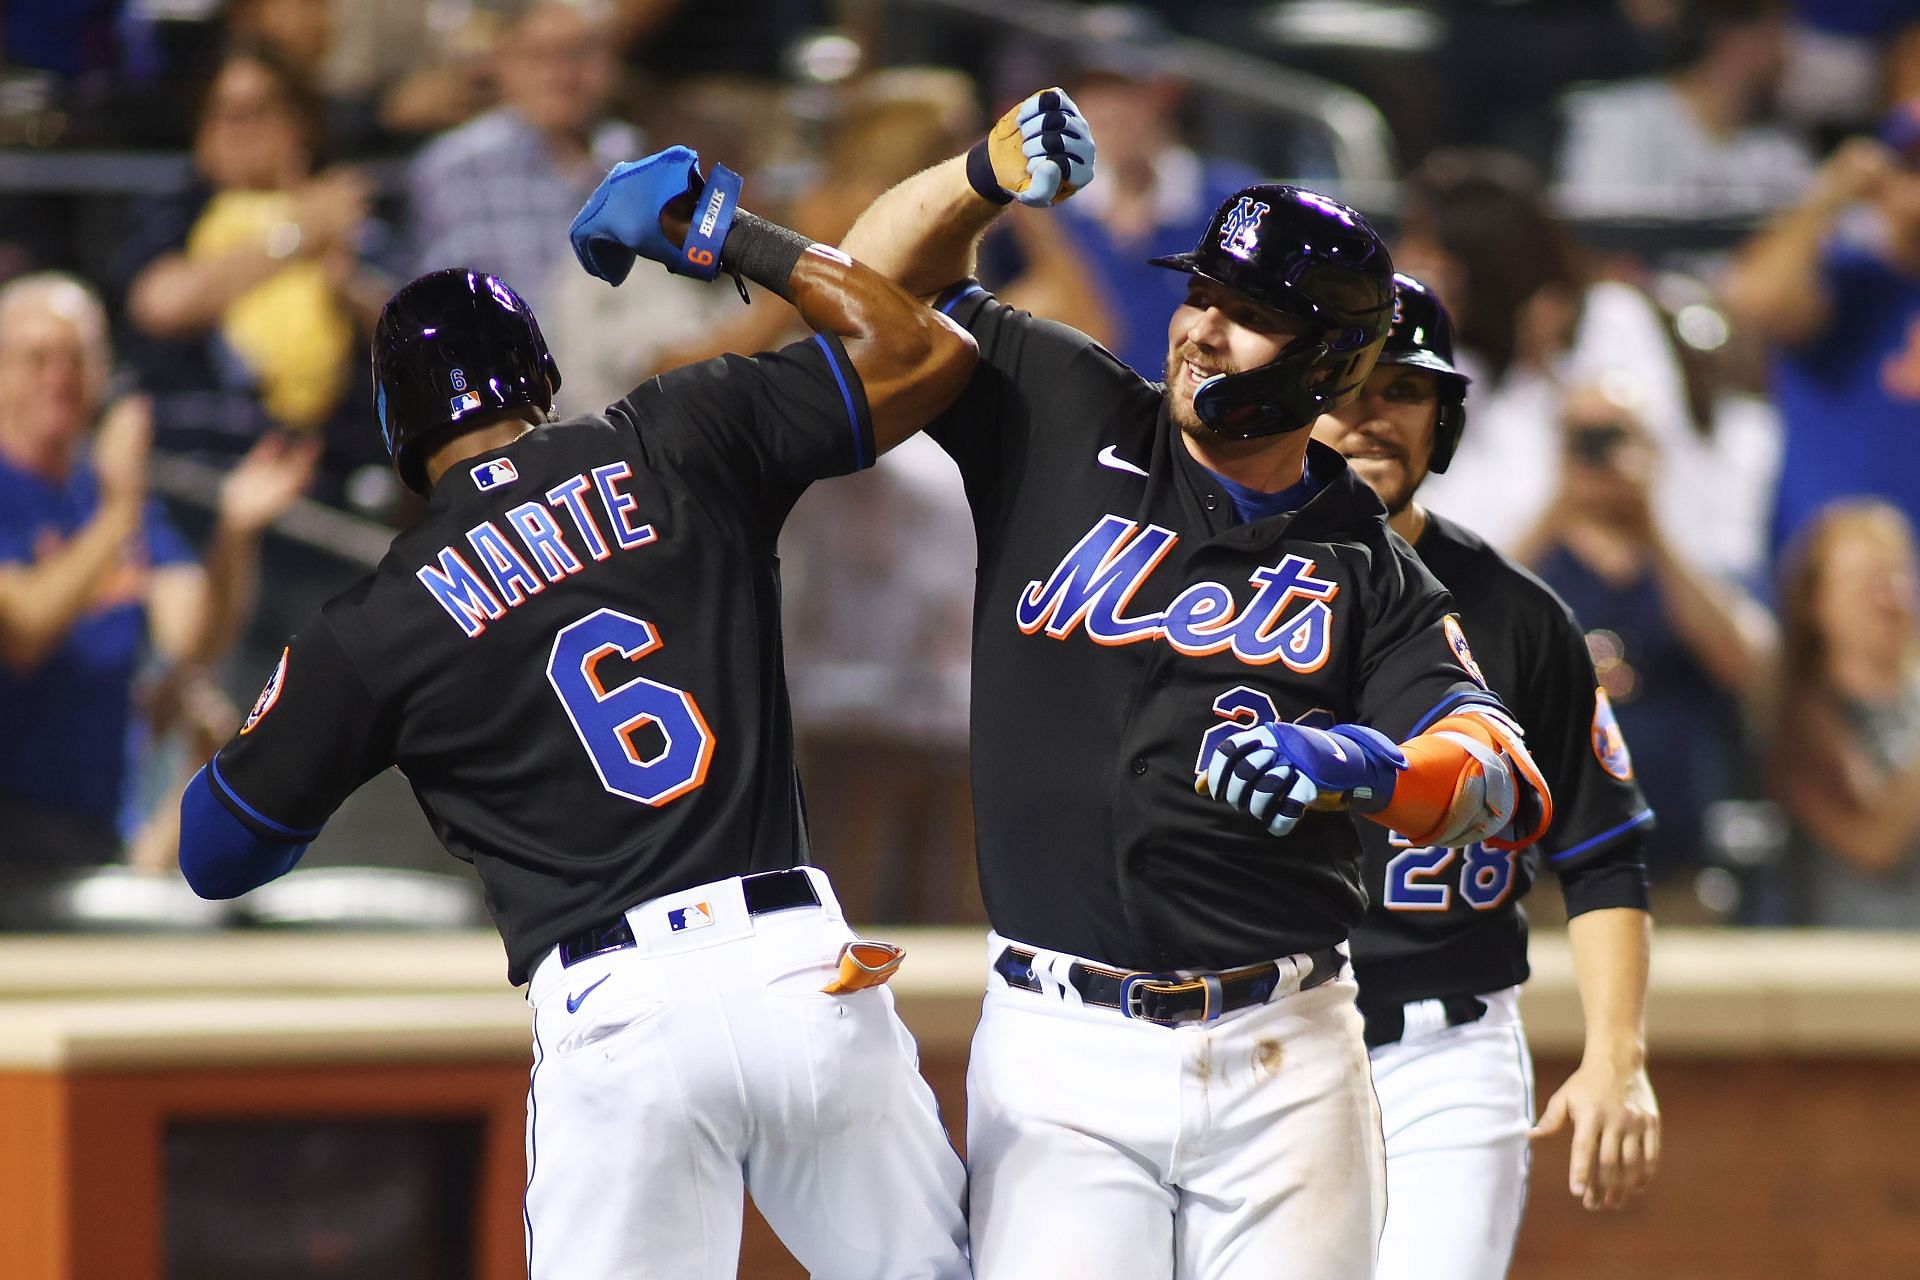 Miami Marlins made it the 50th hit by pitch against the Mets.